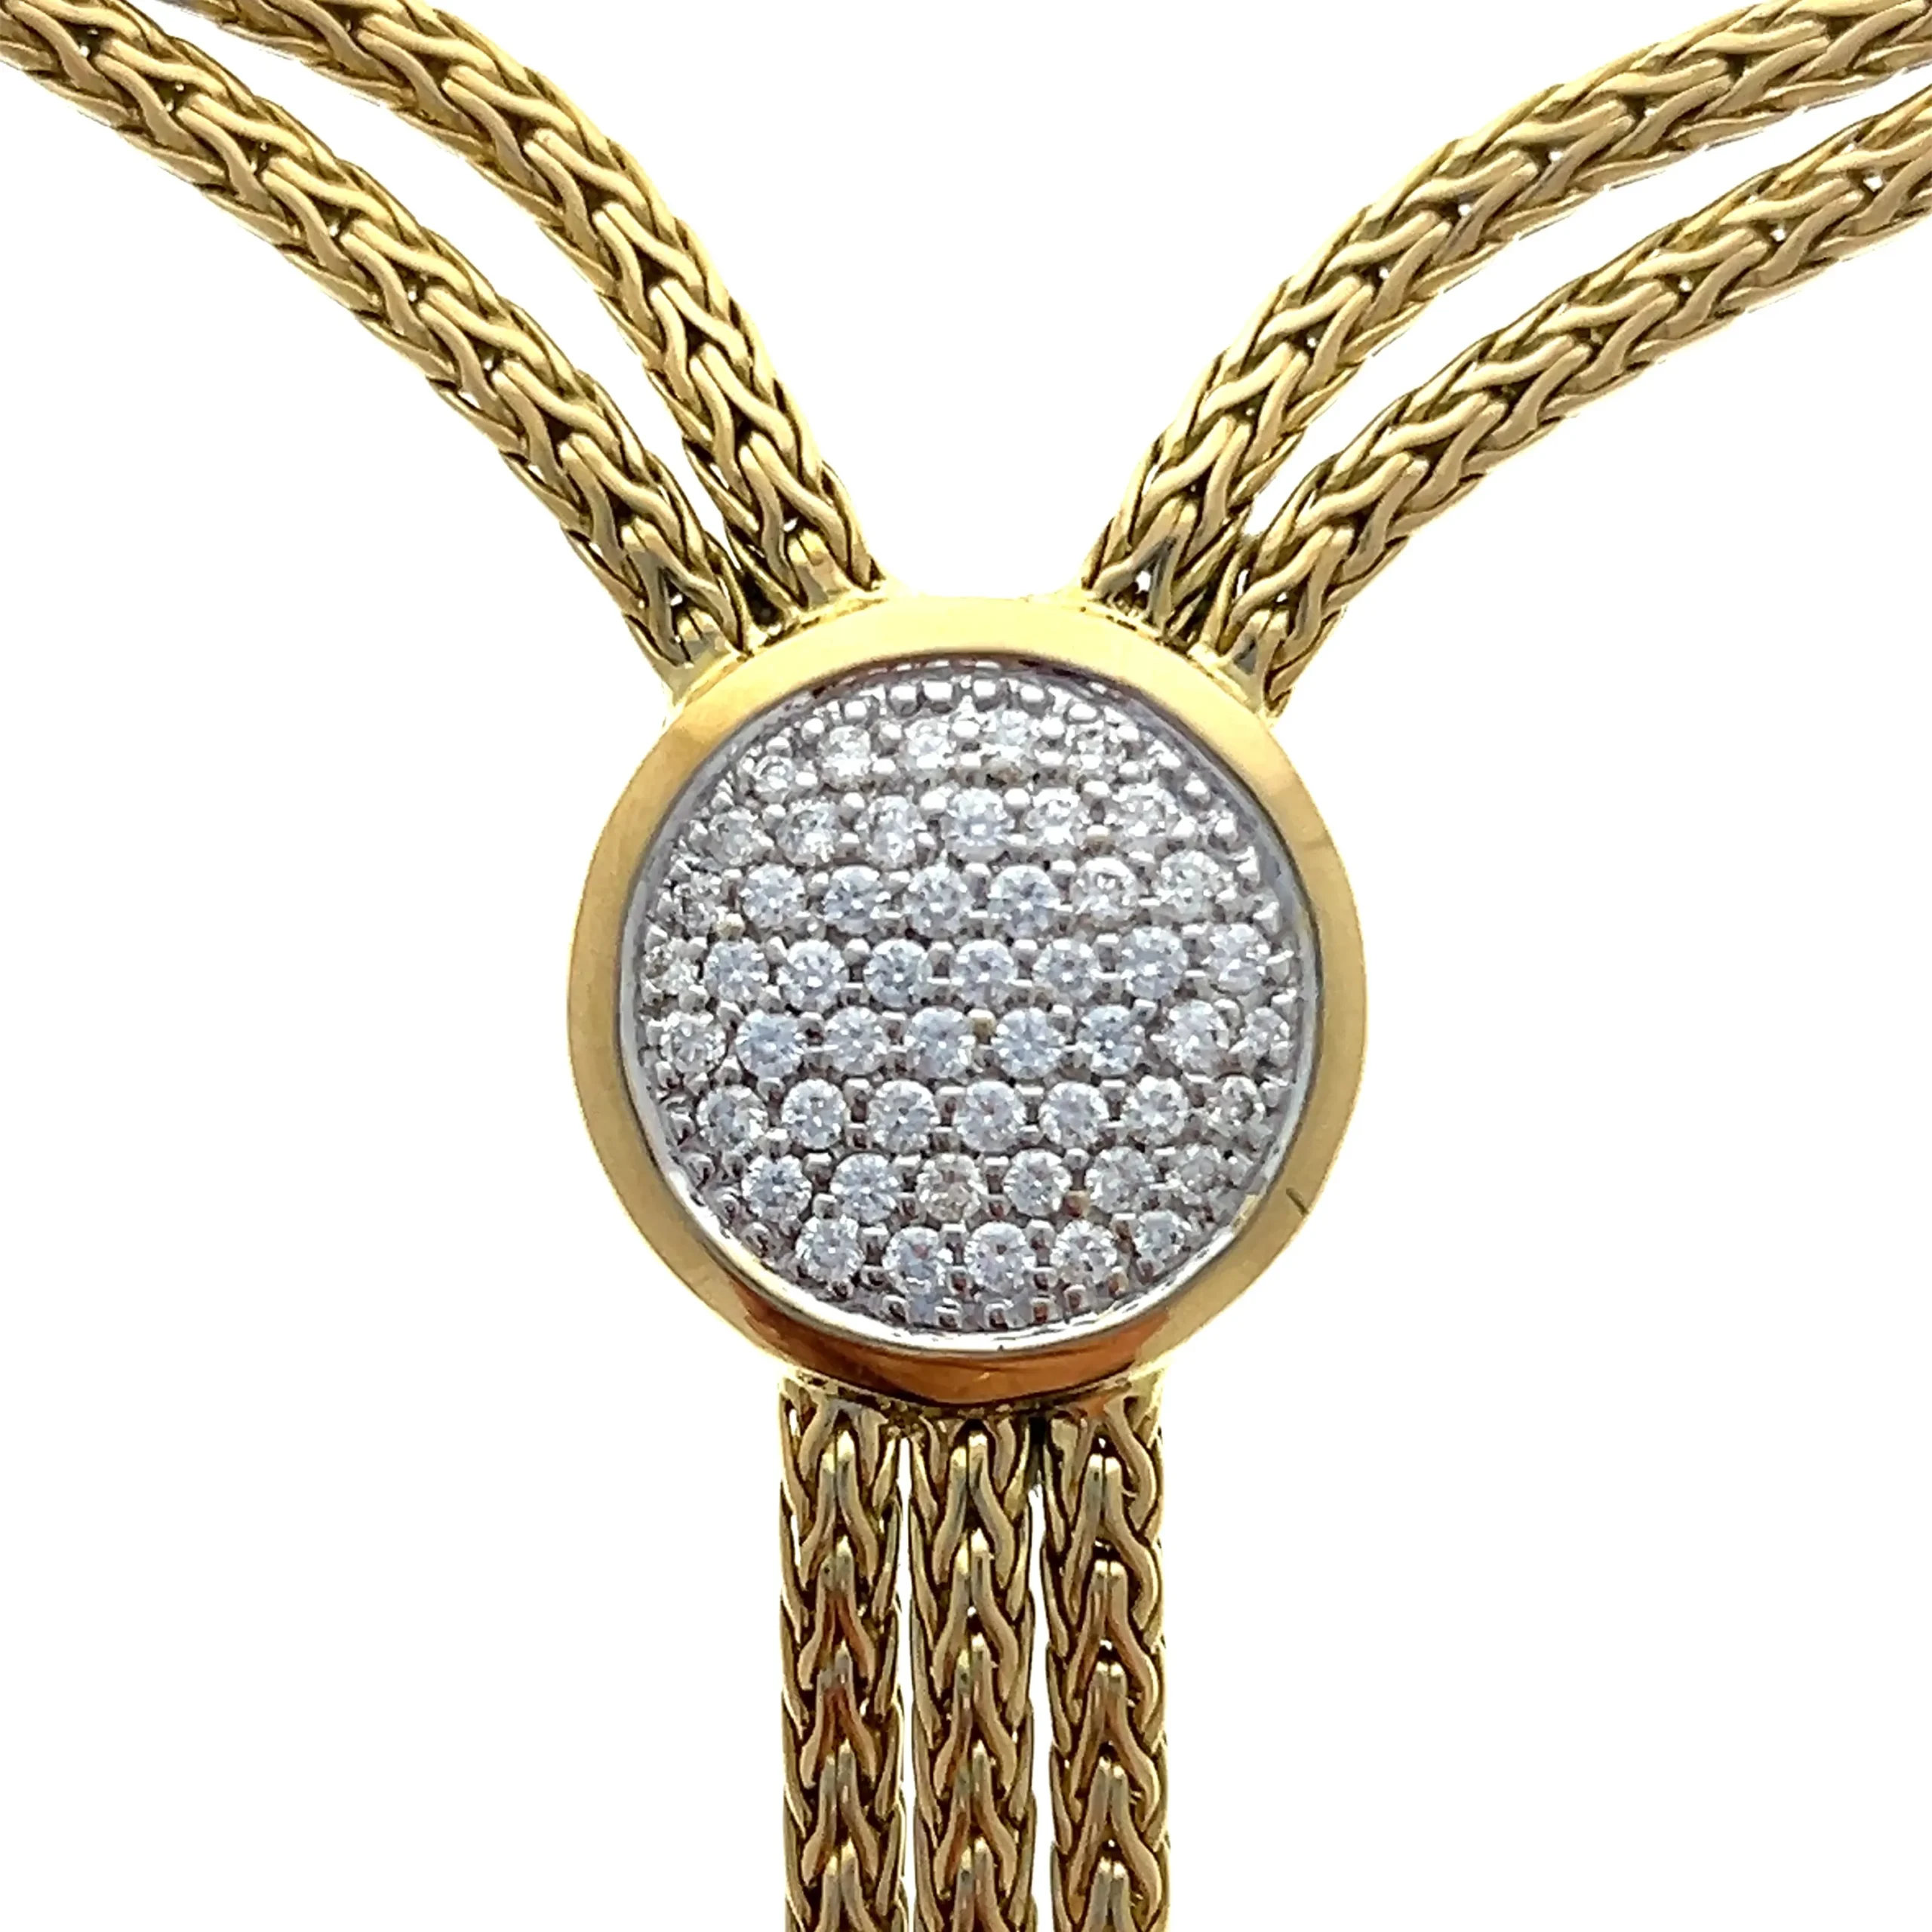 One estate 18 karat yellow gold John Hardy Y-design necklace with a braided chain design. The main part of the necklace features twin braided chain that meet at a round yellow gold pendant set with 52 round brilliant cut diamonds weighing 0.25 total carat weight in white gold pave settings. Three braided chains drop down to a round yellow gold pendant with a hammered texture, with twin braided chains dropping from this pendant to a smaller round yellow gold pendant with a hammered texture, with a single braided chain dropping from this pendant. The necklace measures 17" long. Secured with a lobster claw clasp. Designed by John Hardy.